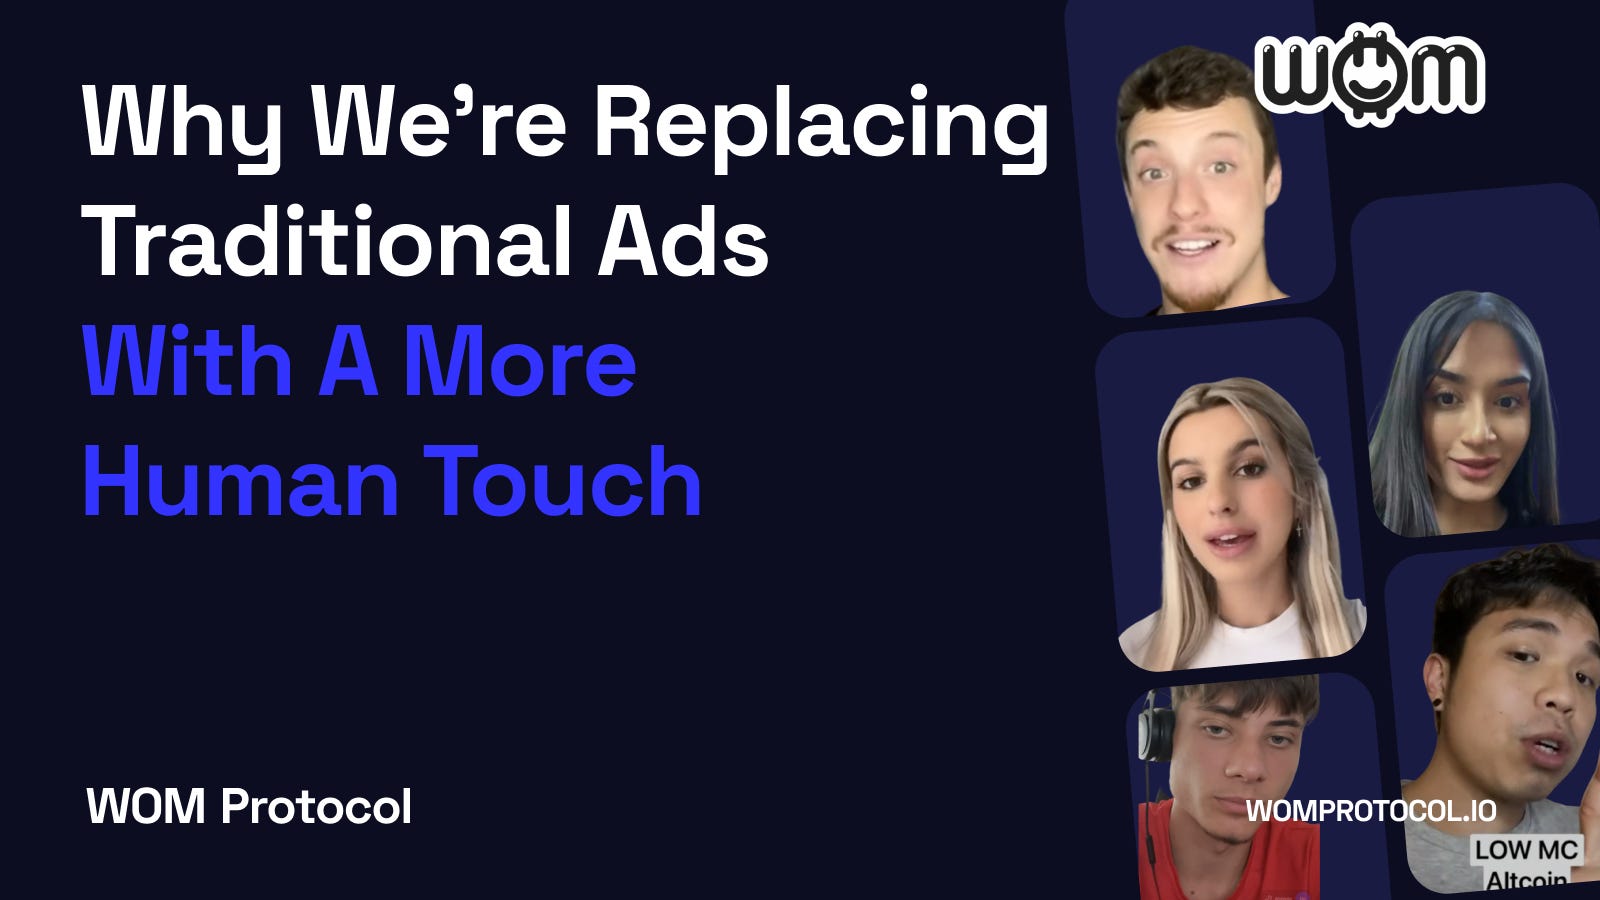 Why We’re Replacing Traditional Ads With A More Human Touch